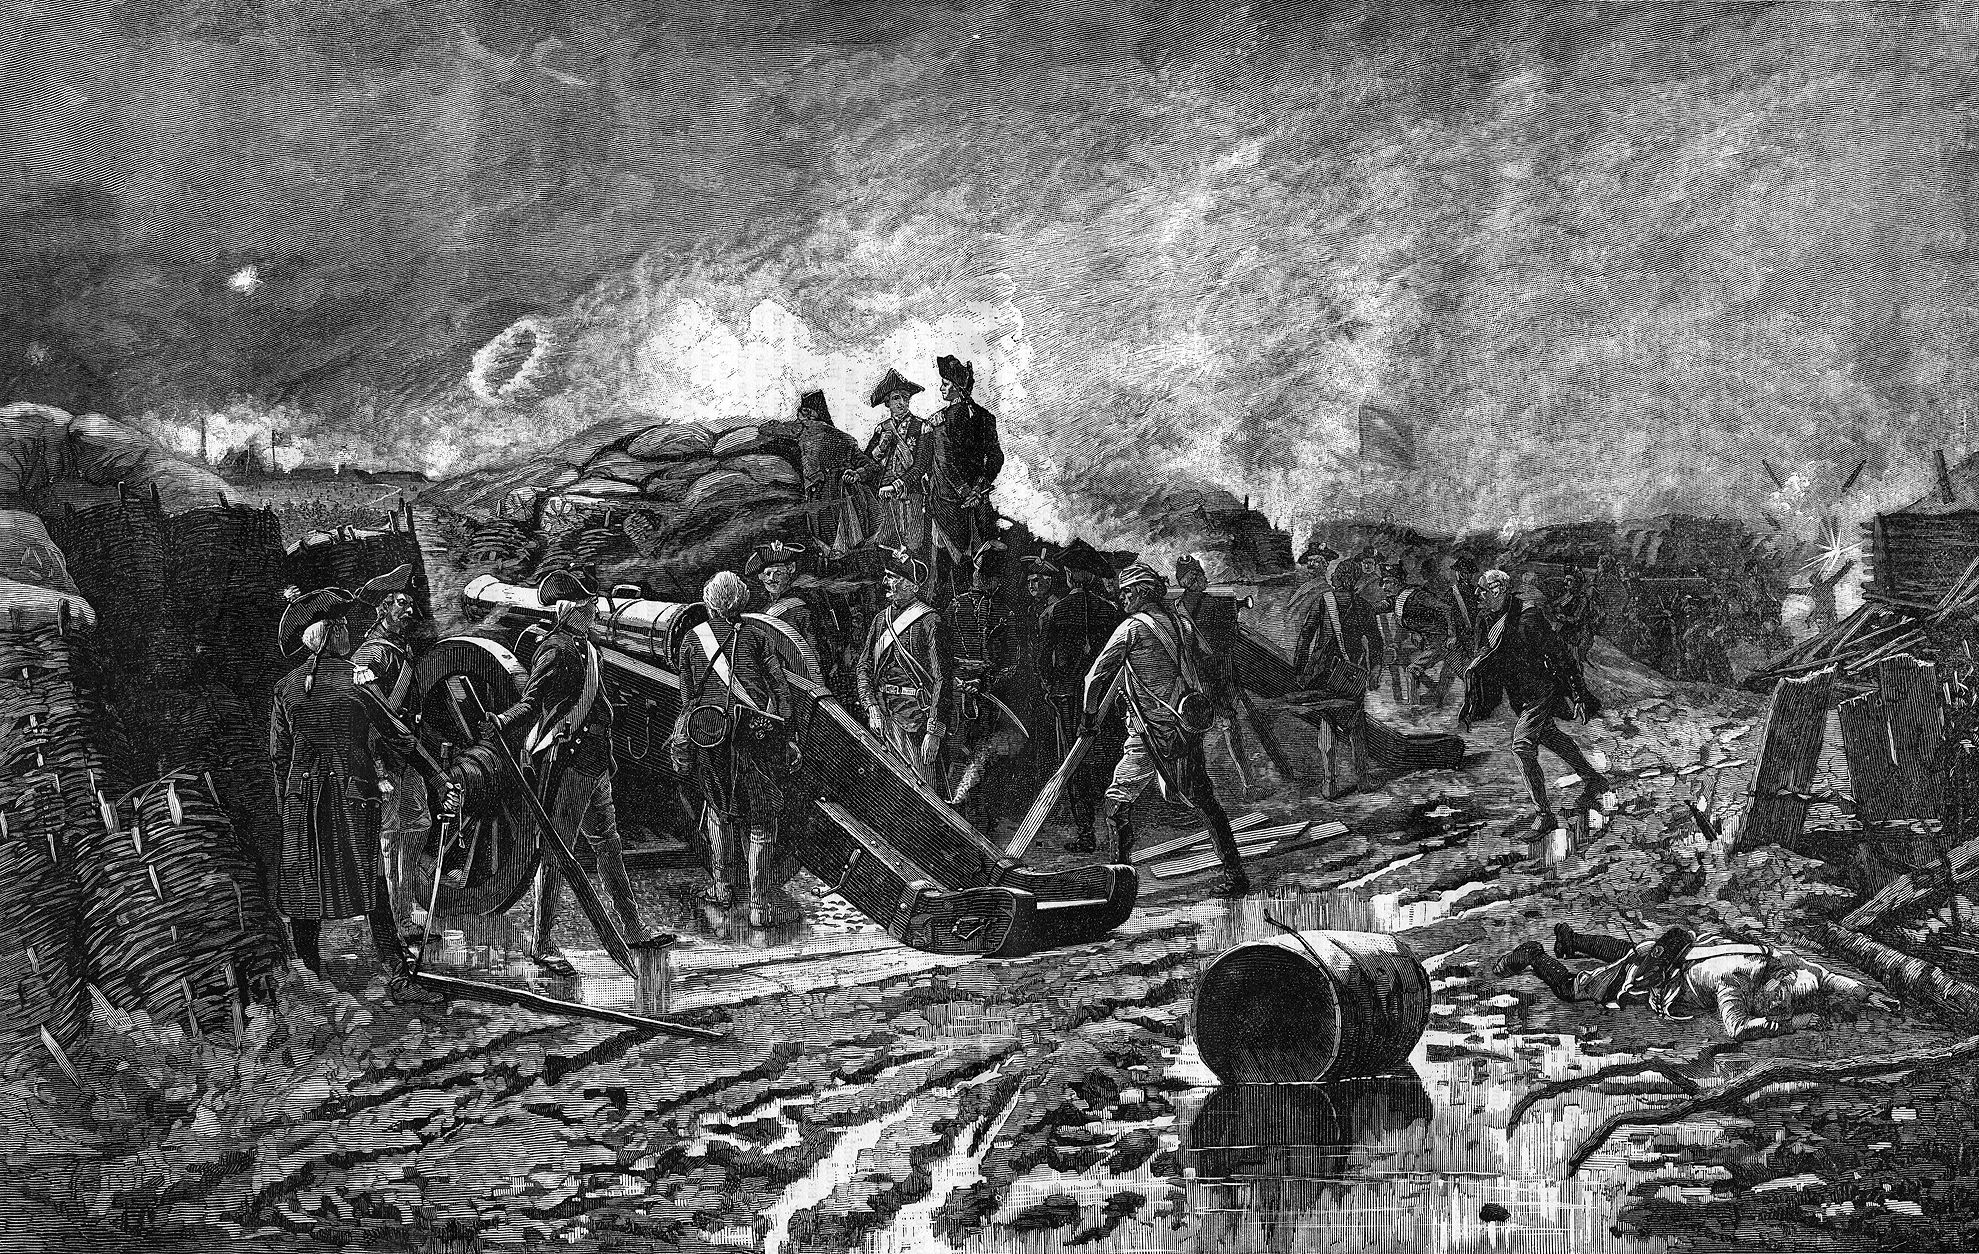 Washington watches the opening bombardment at Yorktown in this 19th-century engraving. The general himself fired the first shot.